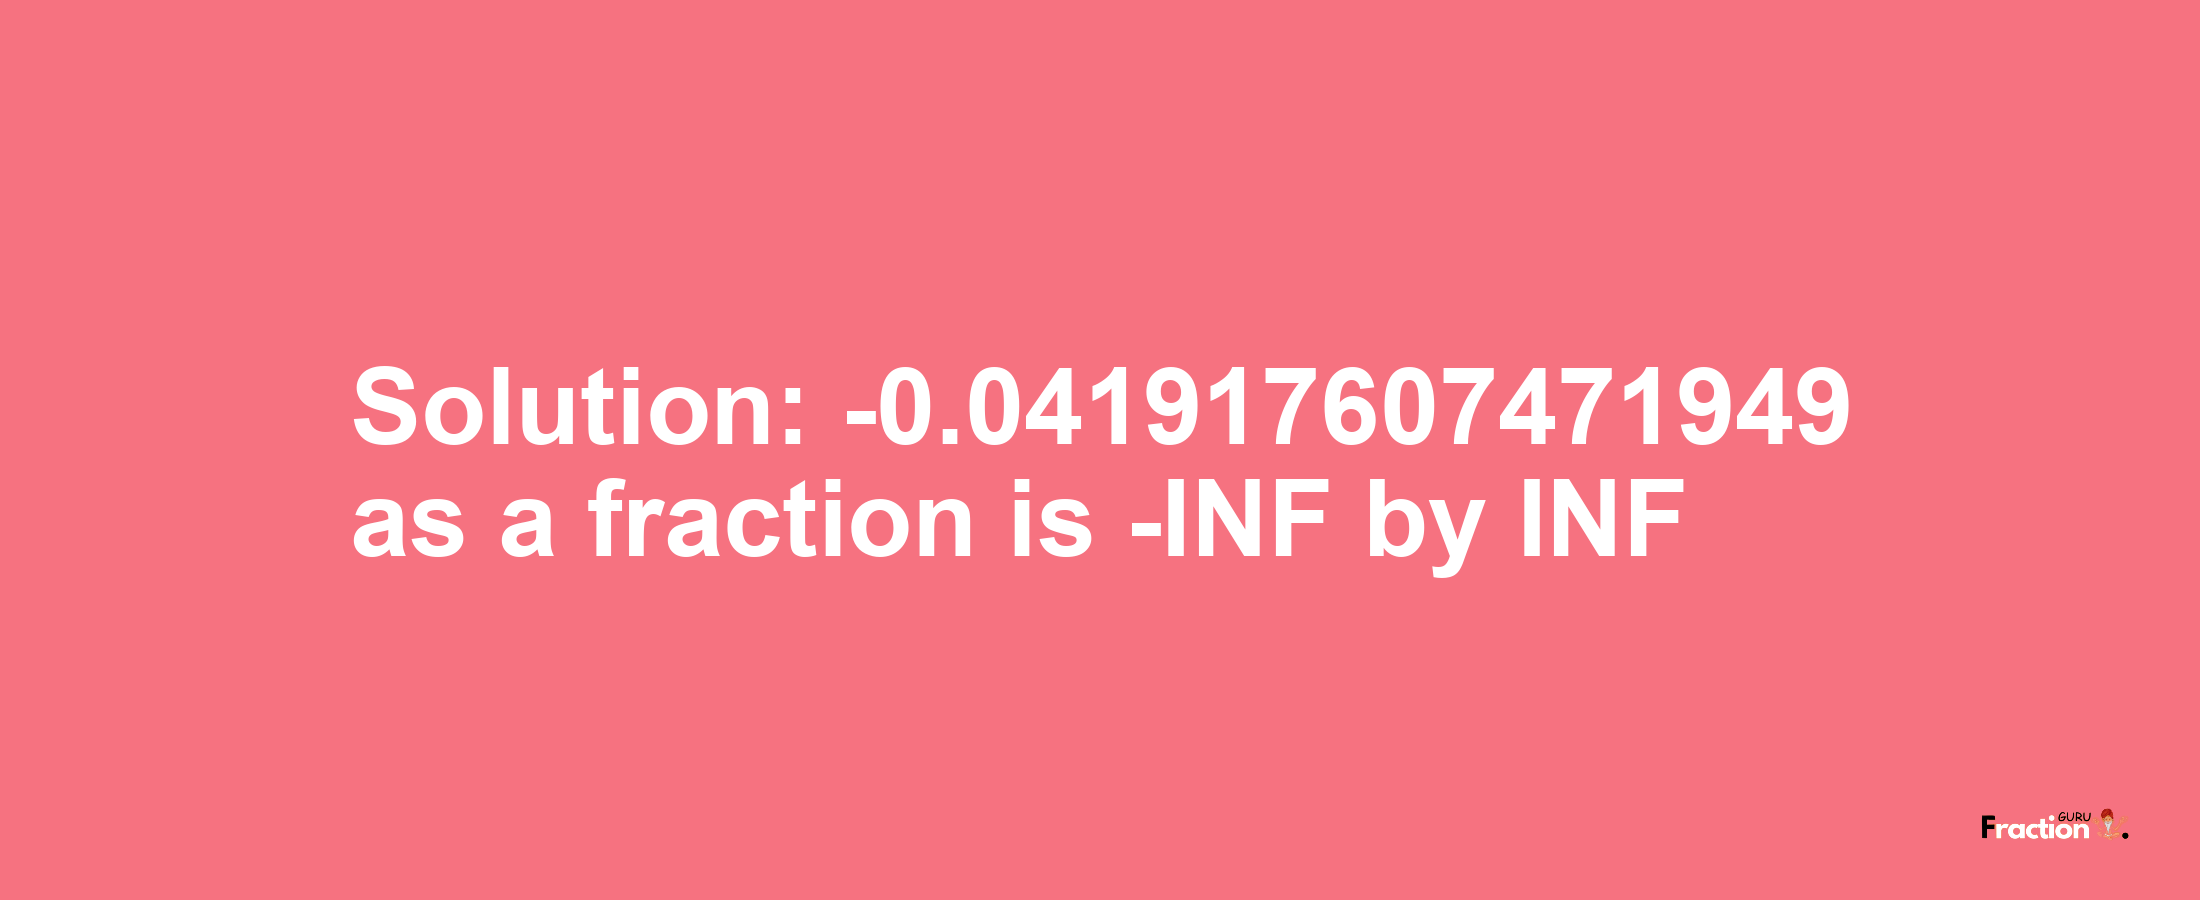 Solution:-0.041917607471949 as a fraction is -INF/INF